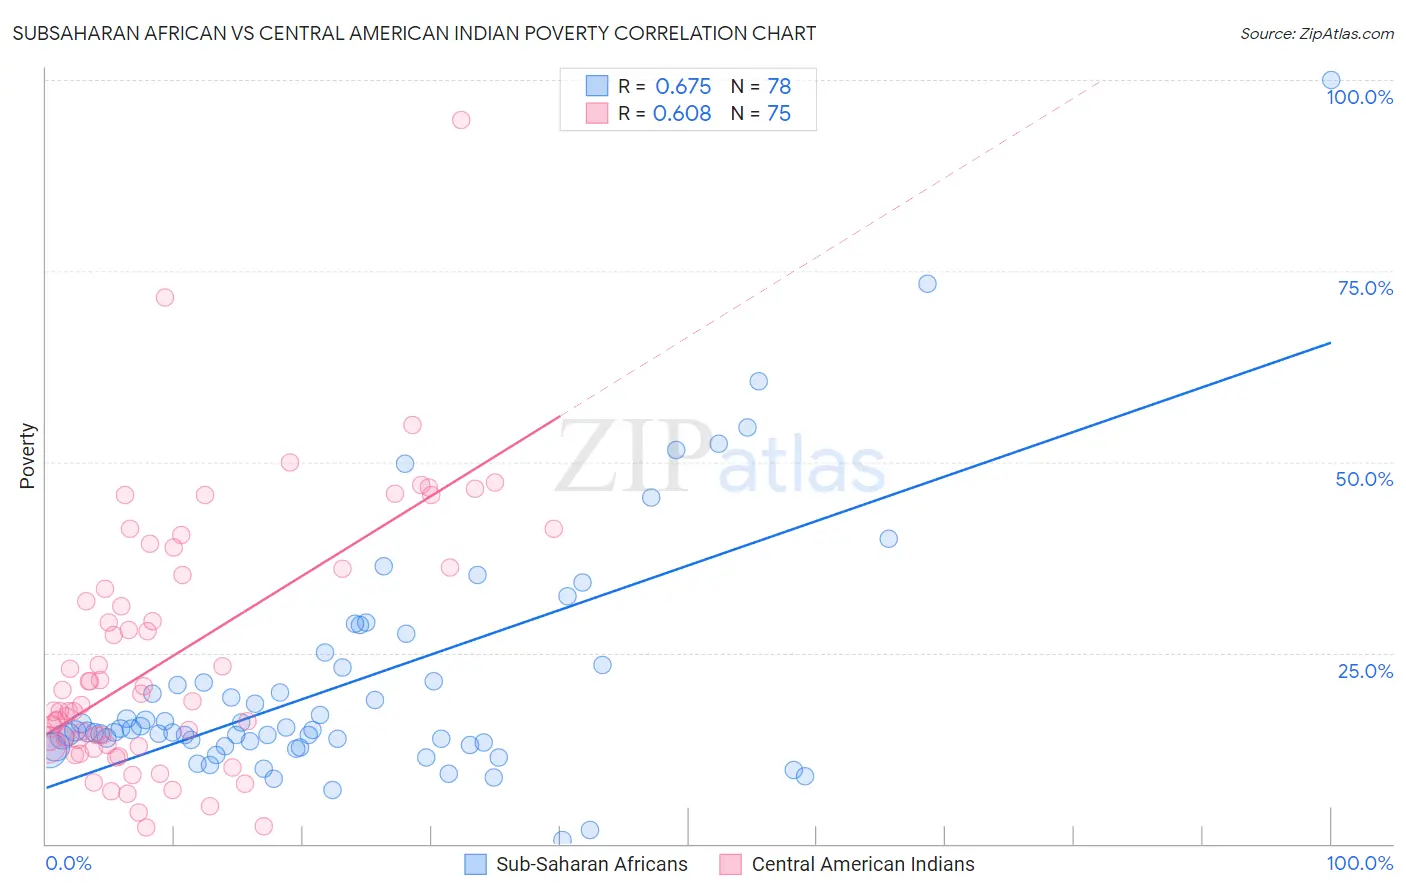 Subsaharan African vs Central American Indian Poverty